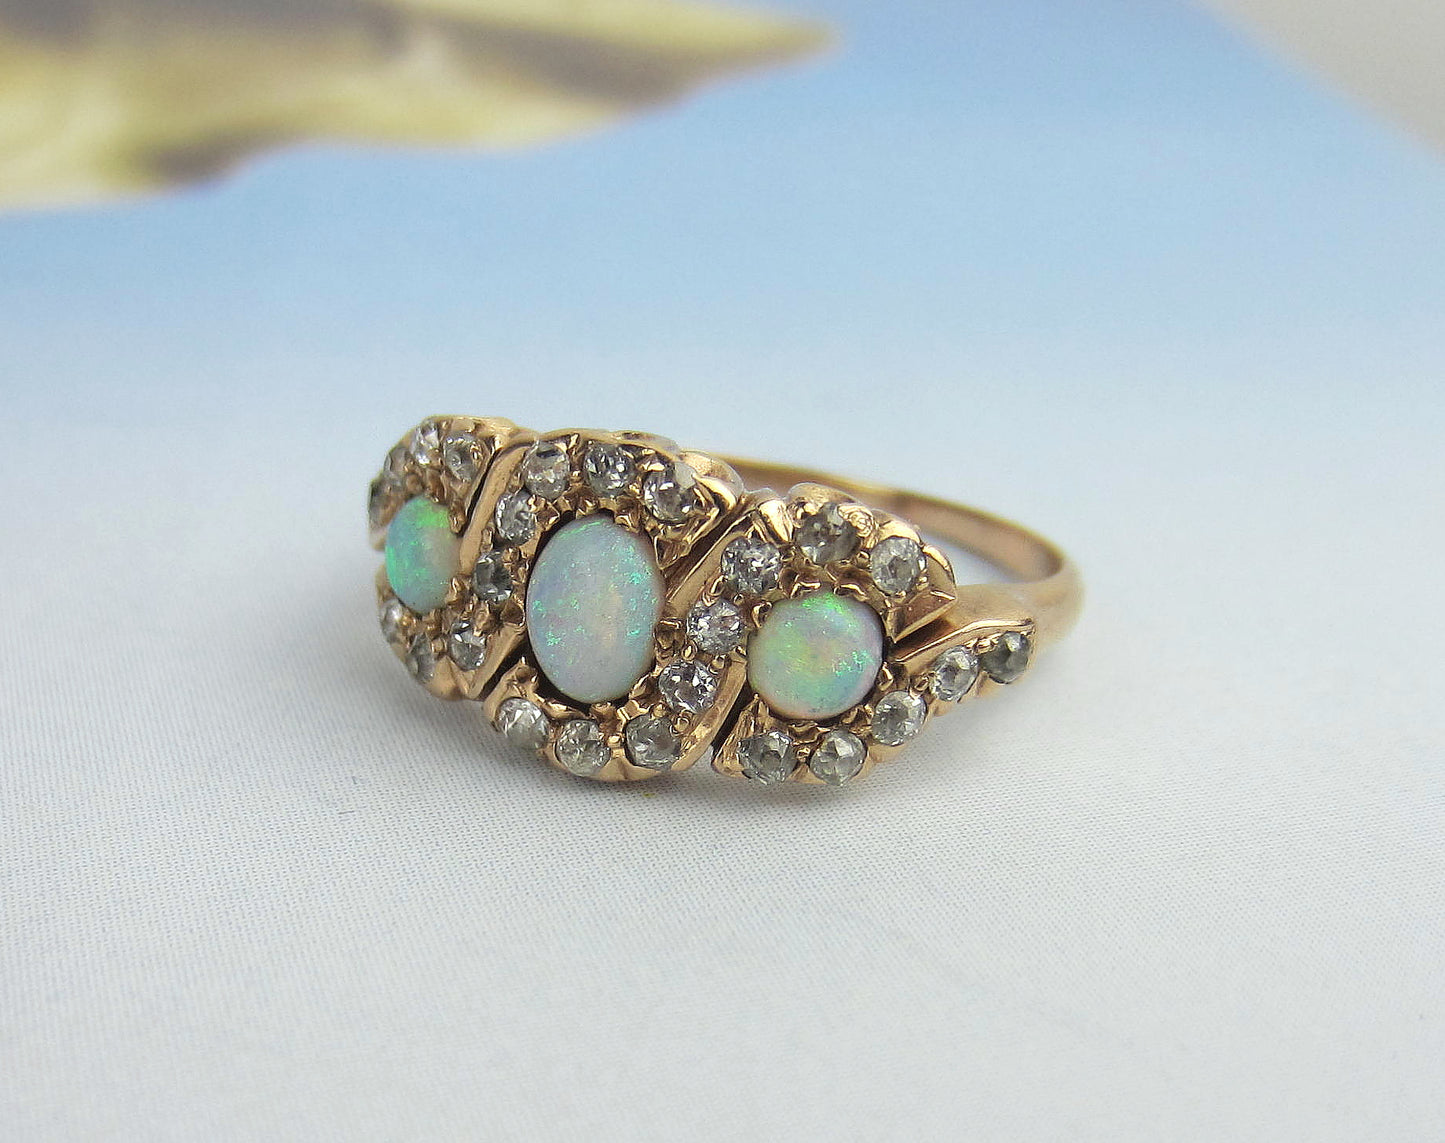 SOLD Victorian Opal and Diamond Ring 14k c. 1900